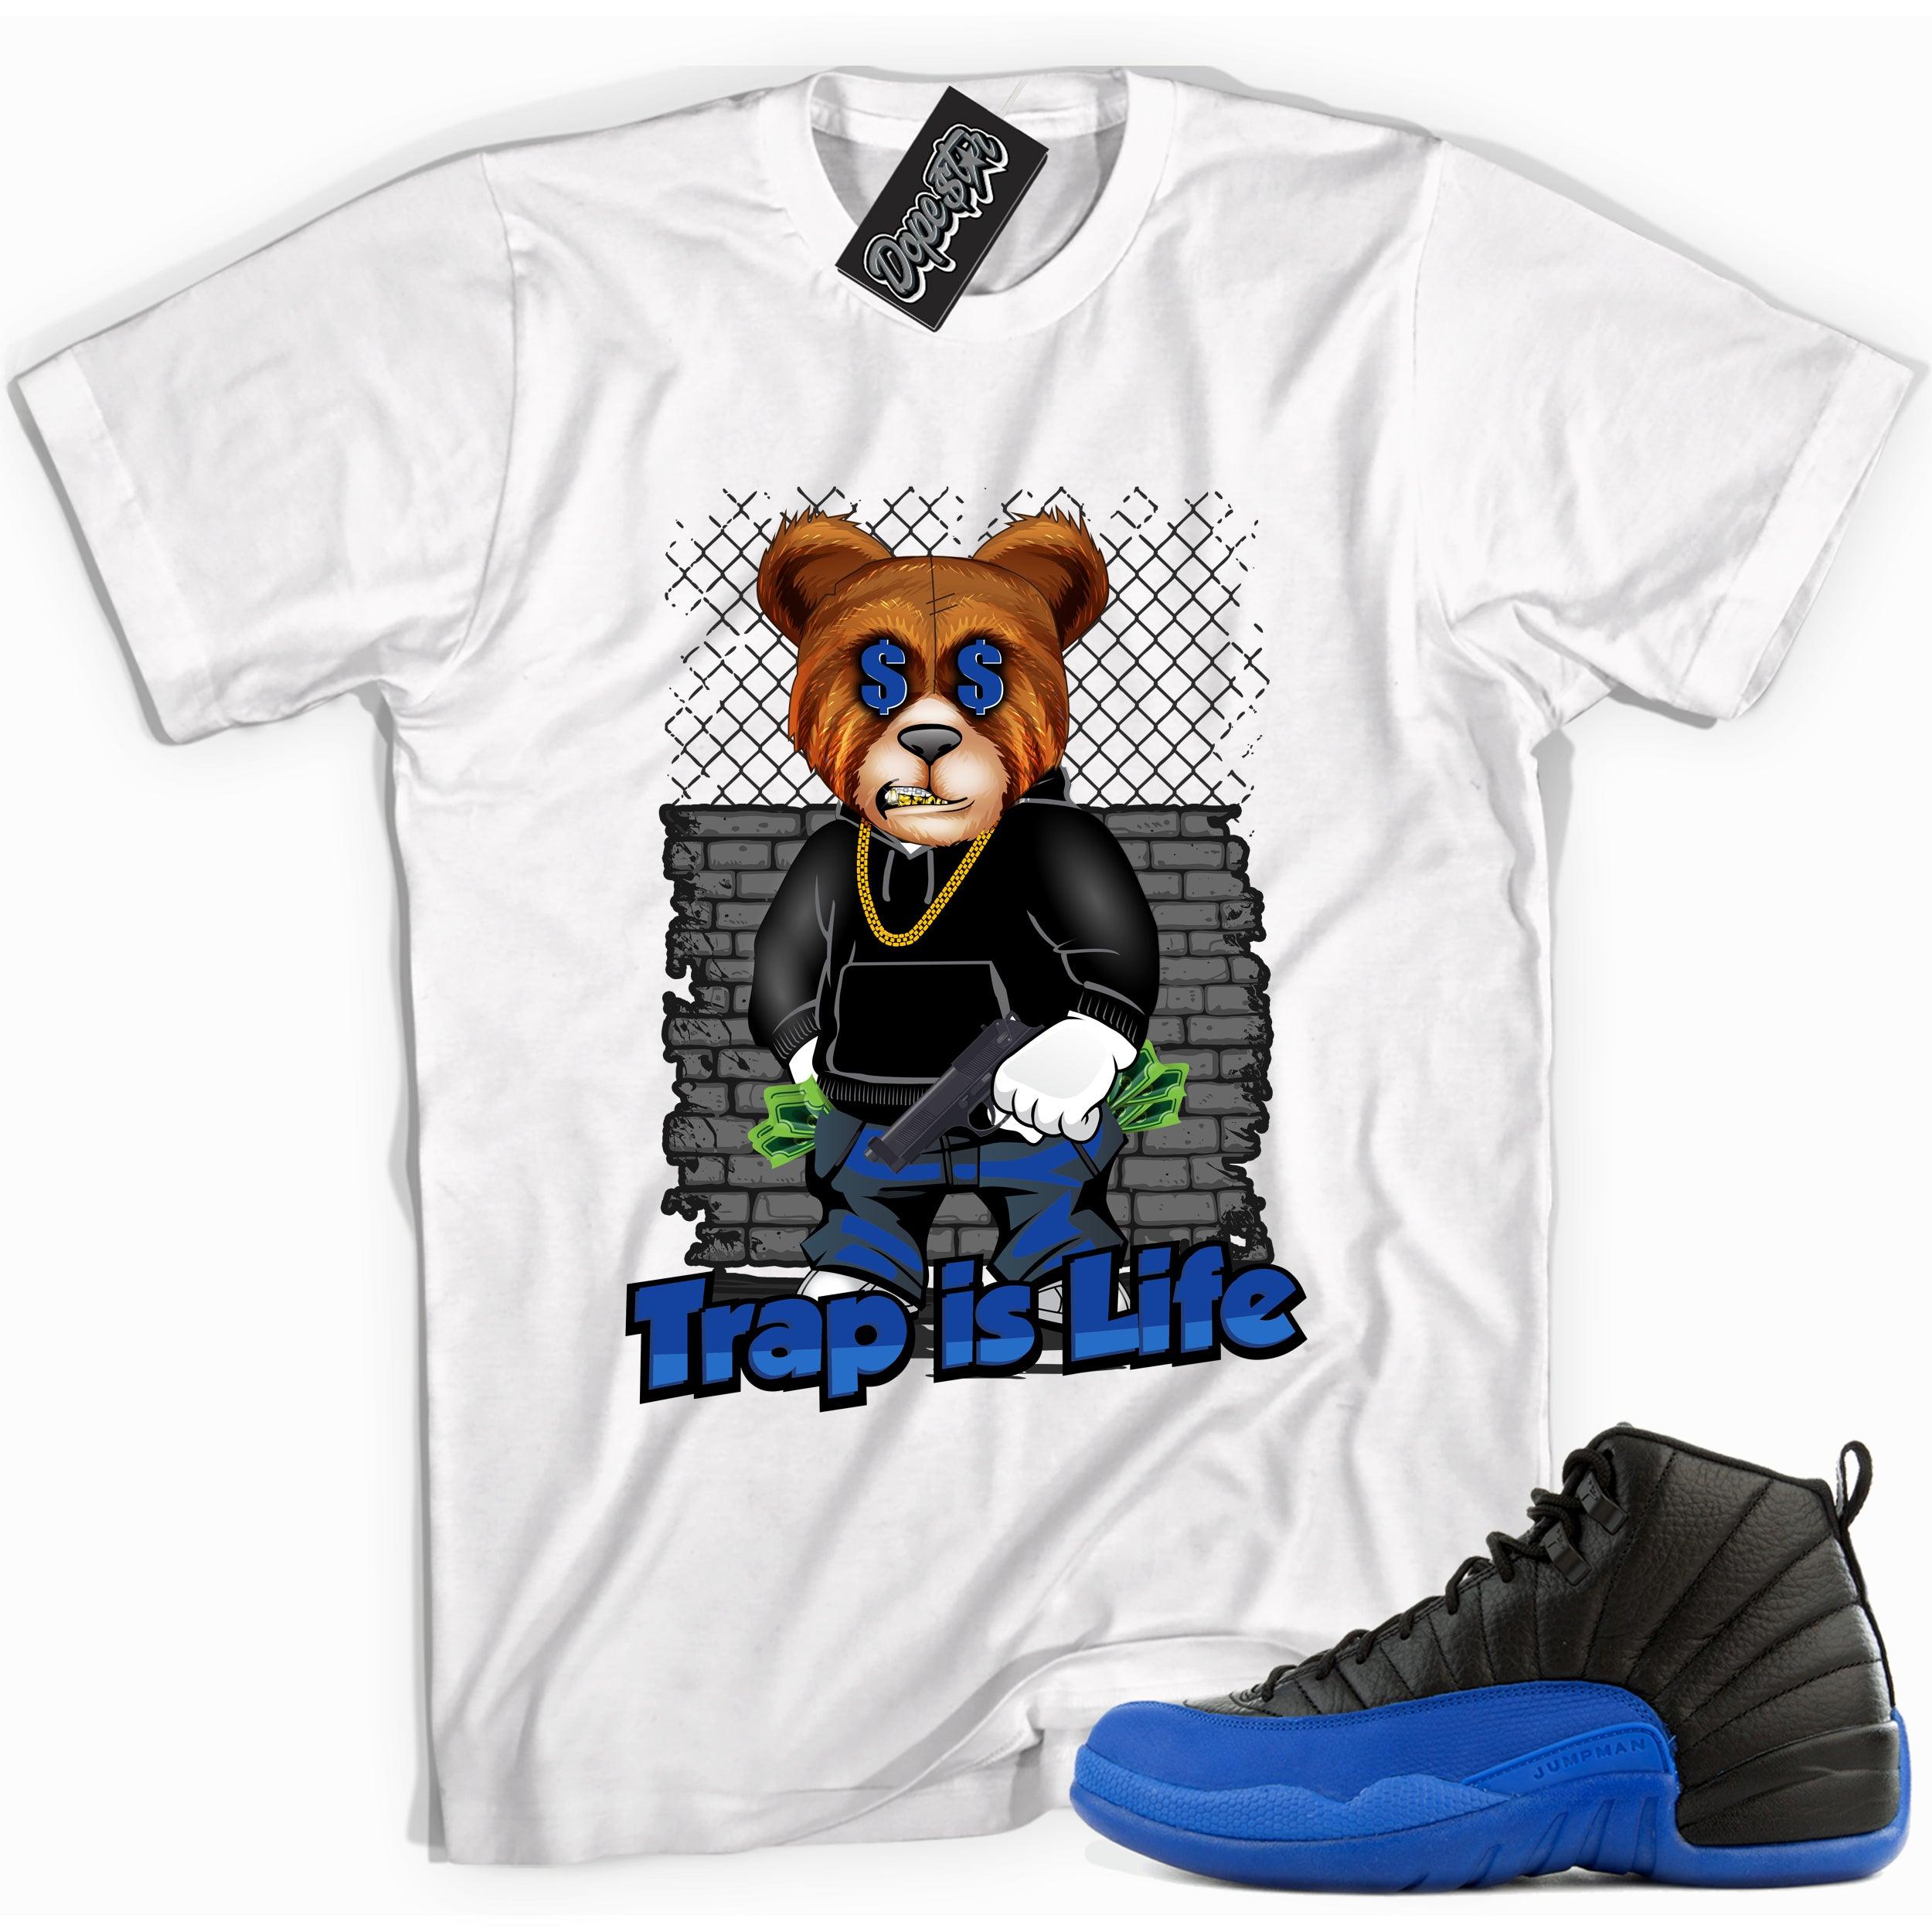 Cool white graphic tee with 'trap is life' print, that perfectly matches Air Jordan 12 Retro Black Game Royal sneakers.